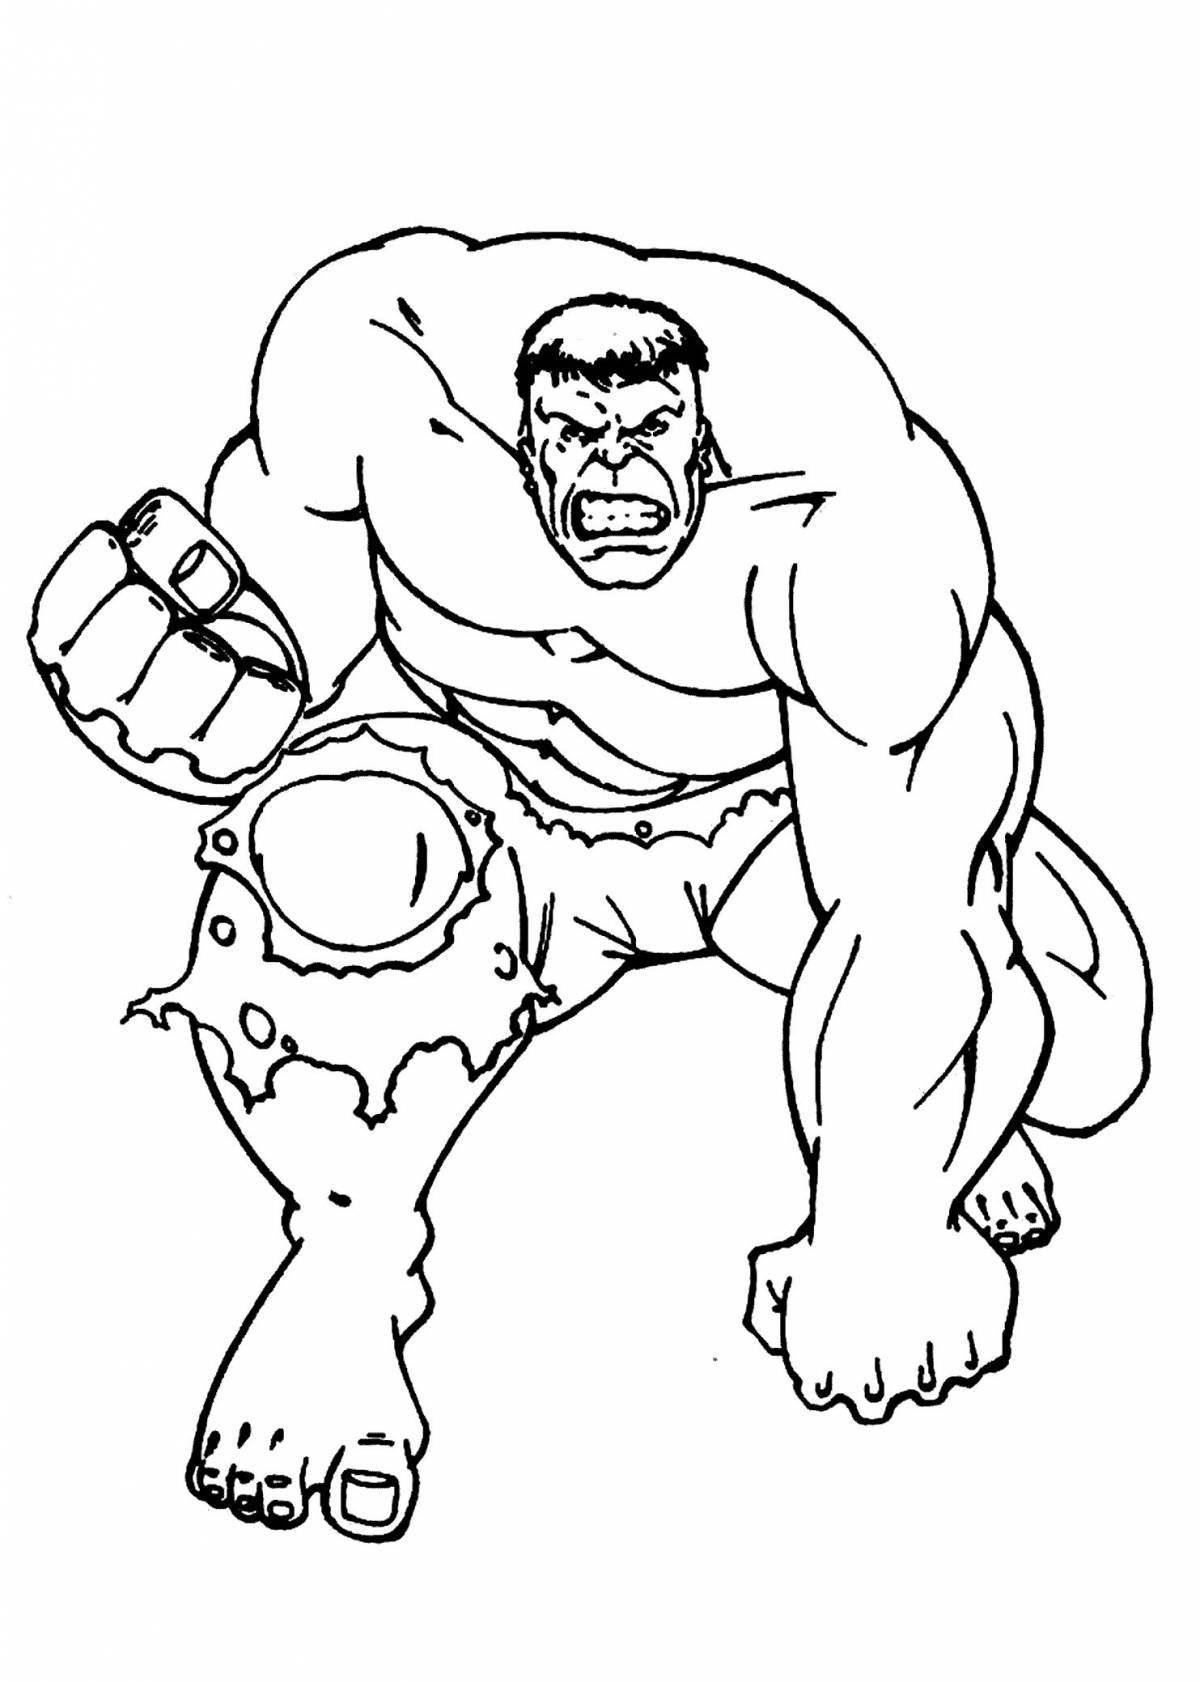 Adorable Hulk coloring book for 5-6 year olds